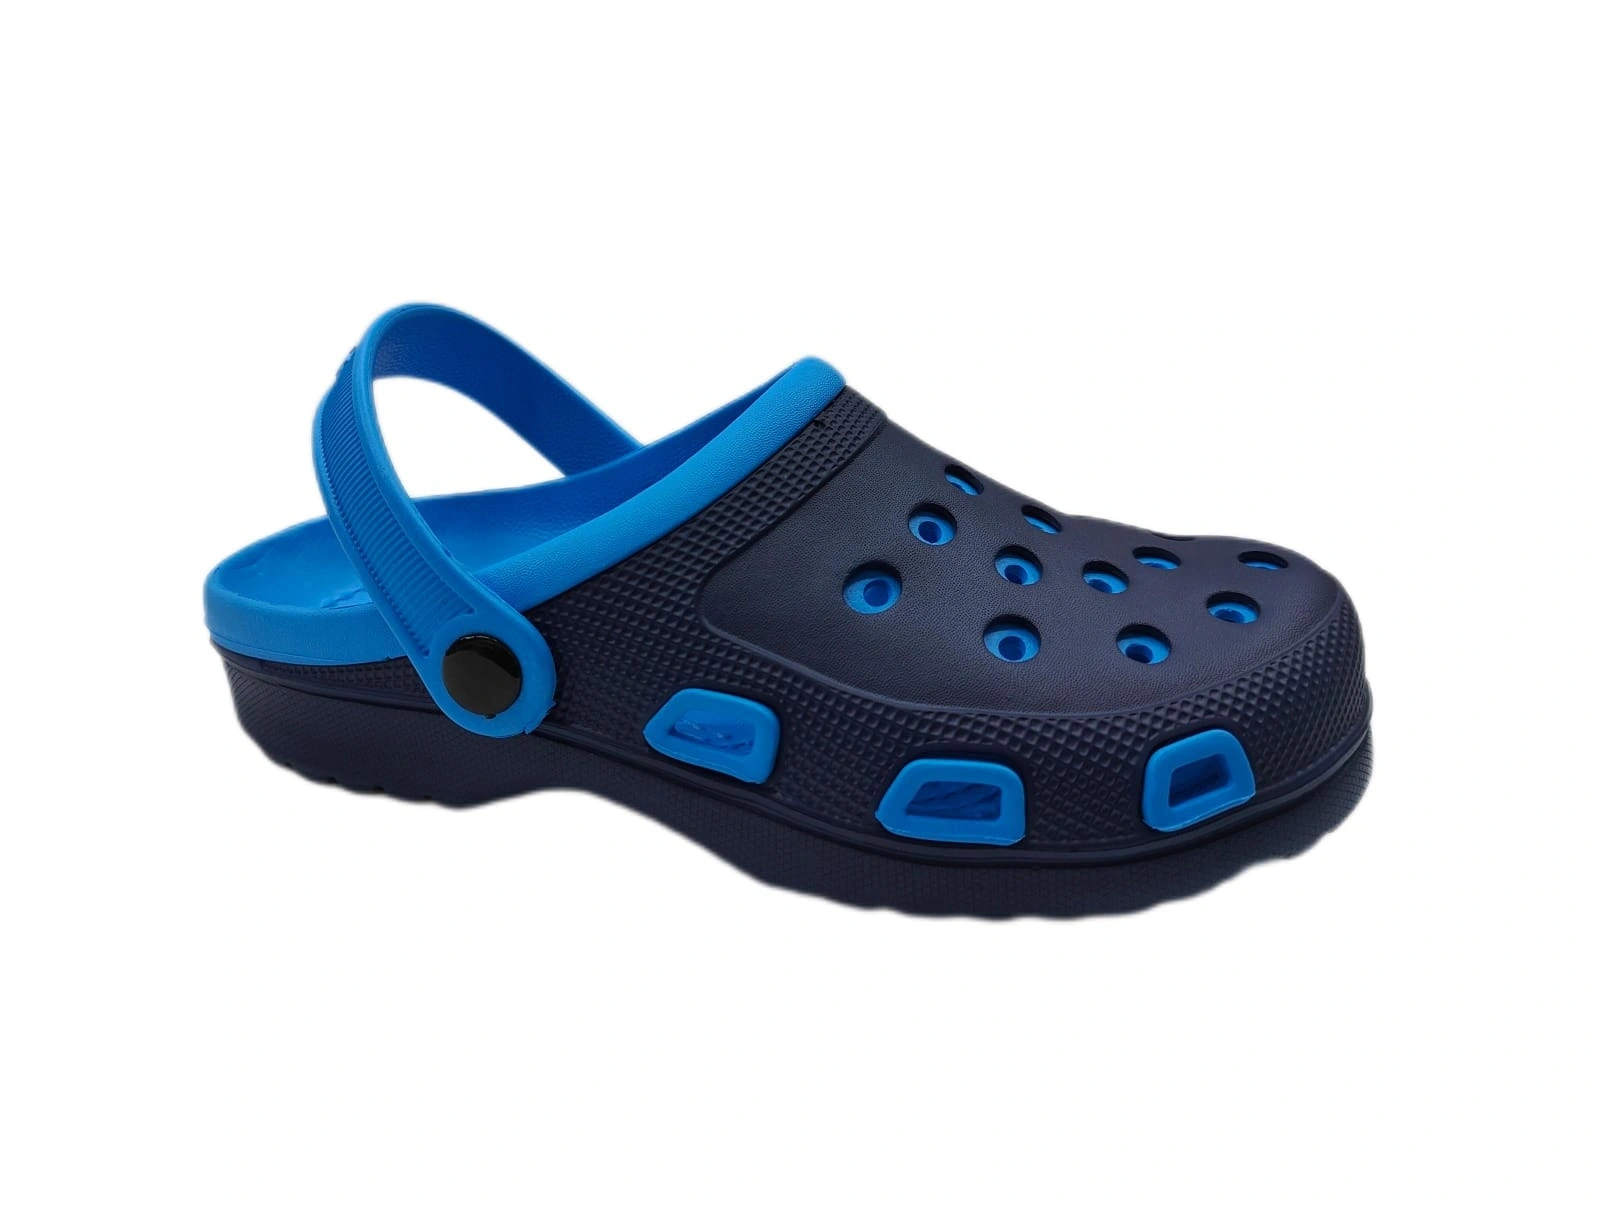 Clog Sandals for Men and Women: Comfortable, Lightweight Design with Durable Upper and Slip-Resistant Outsole for All-Day Wear-Blue-UK6-3